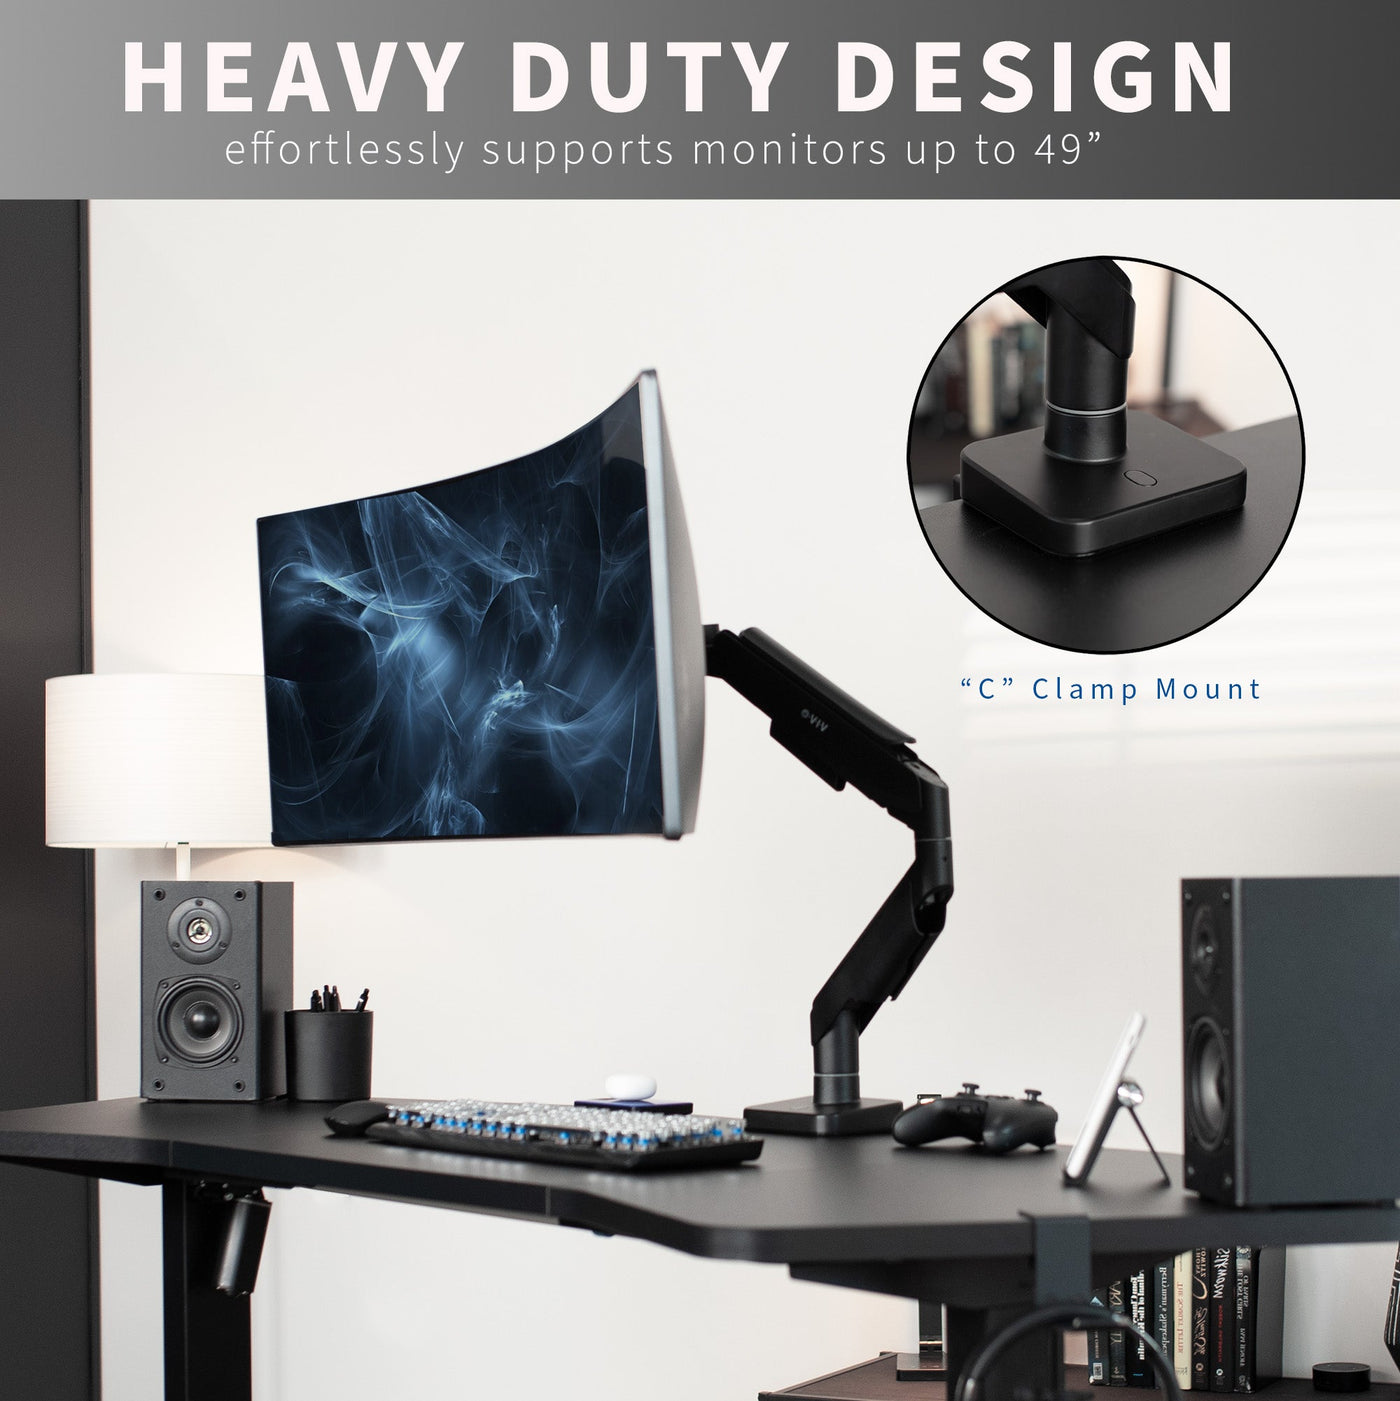  The ultimate ultrawide mount for gamers and content creators alike, this premium stand perfectly counterbalances the weight of your 17” to 49” monitor (up to 44 lbs) for optimal ergonomic positioning. 